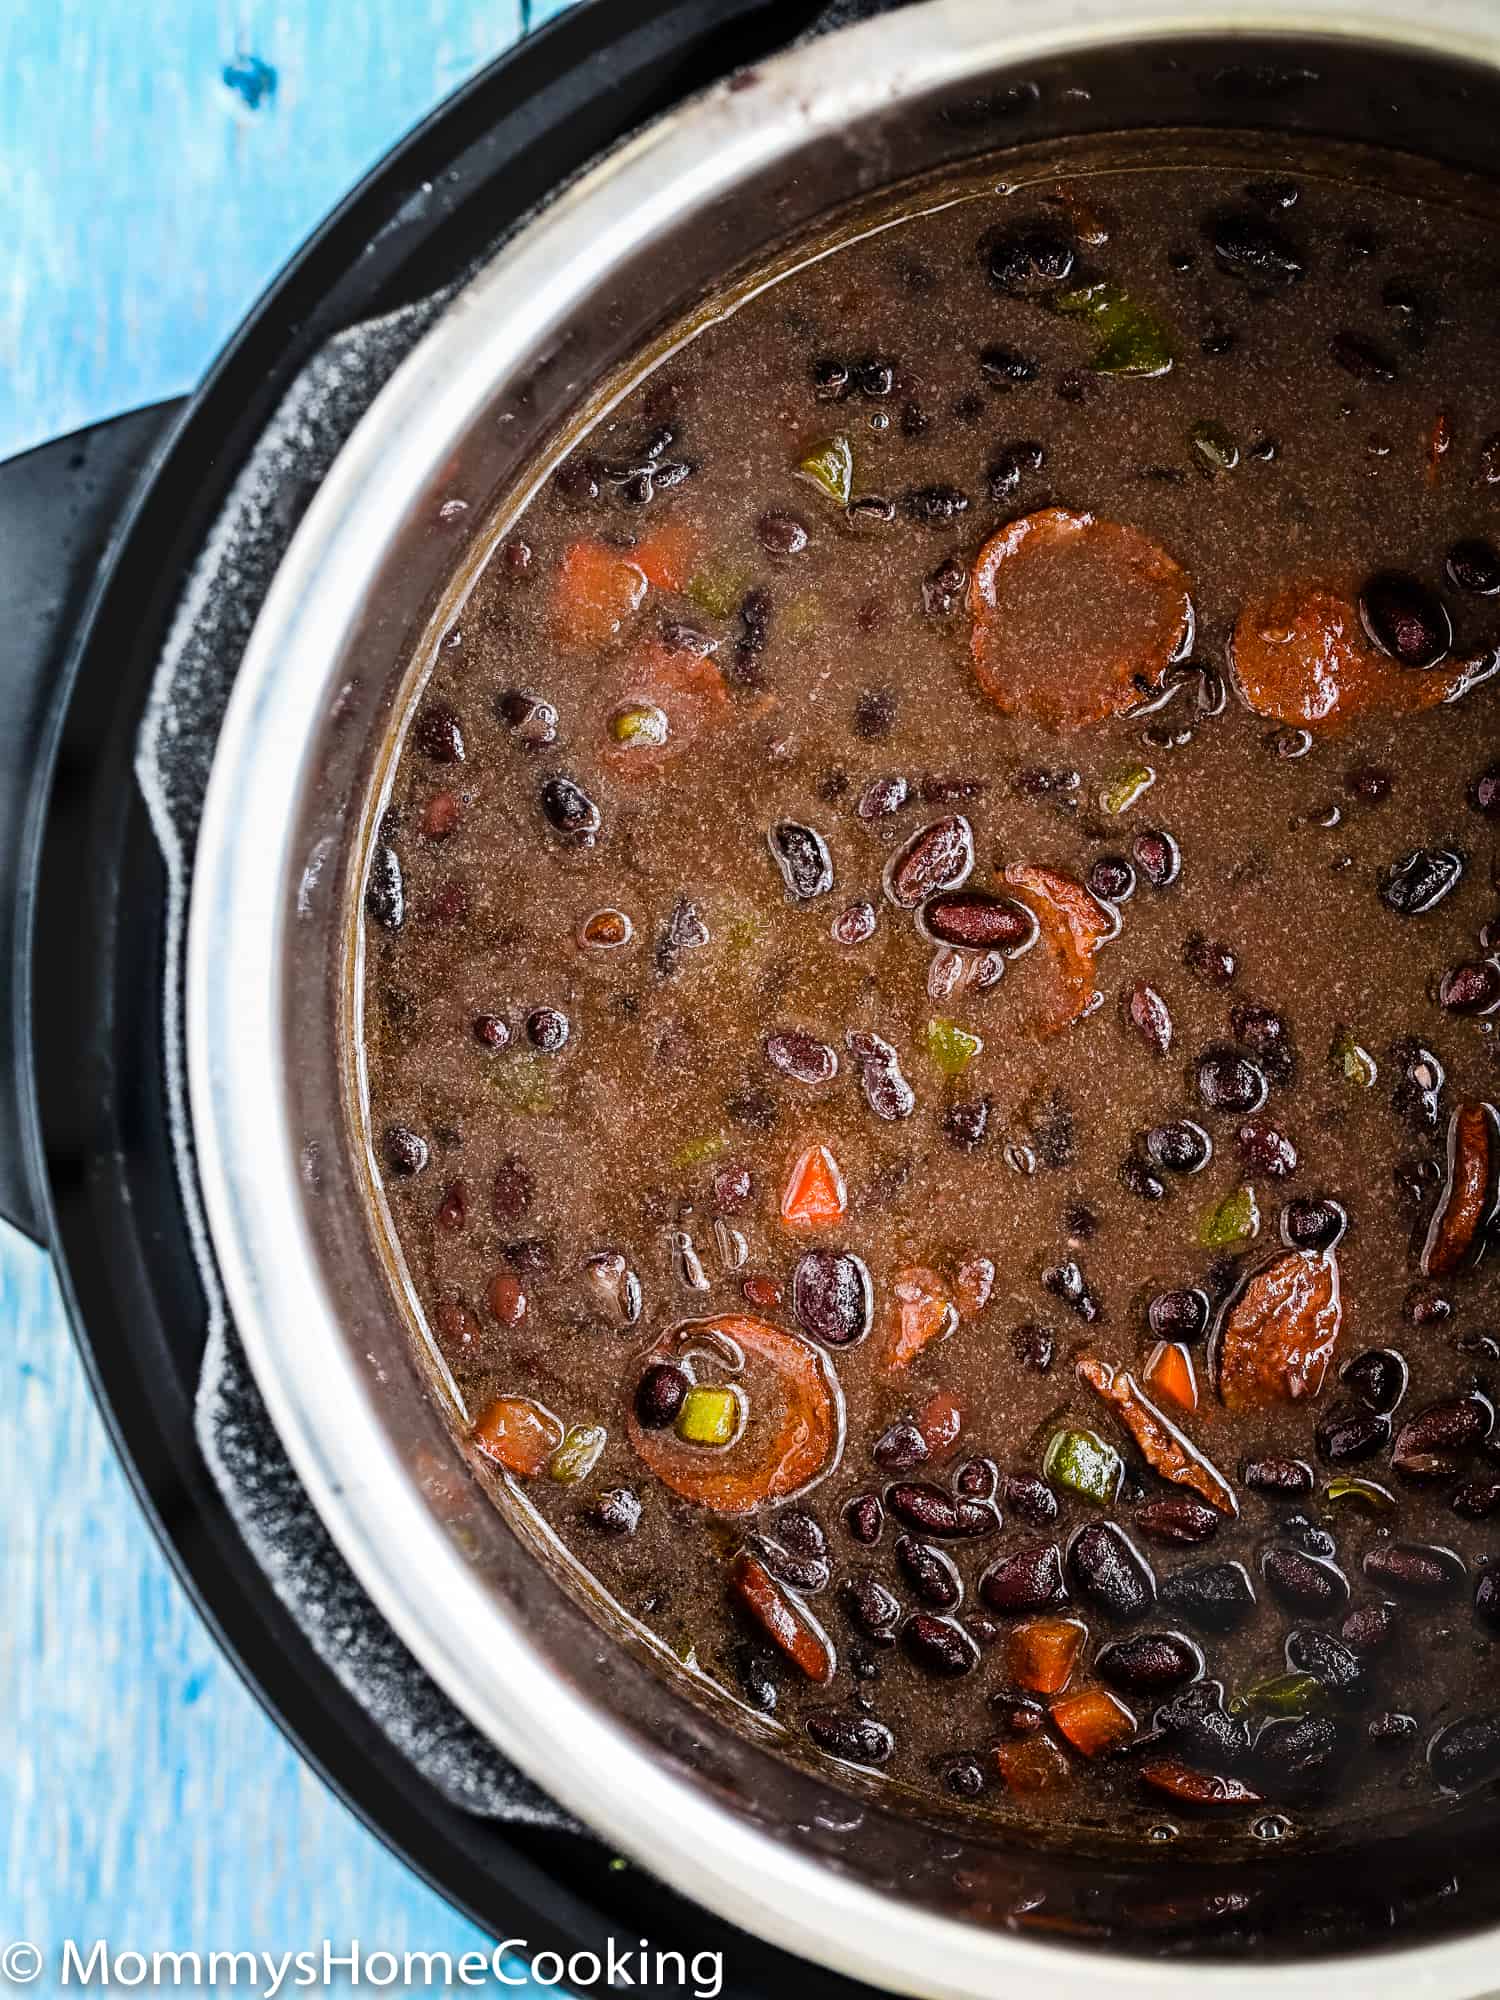 These Instant Pot Black Beans with Chorizo are hearty, satisfying and incredibly flavorful! They're quick and easy to make and perfect for feeding a crowd. Serve them on their own, or as a side dish to complete any meal. https://mommyshomecooking.com